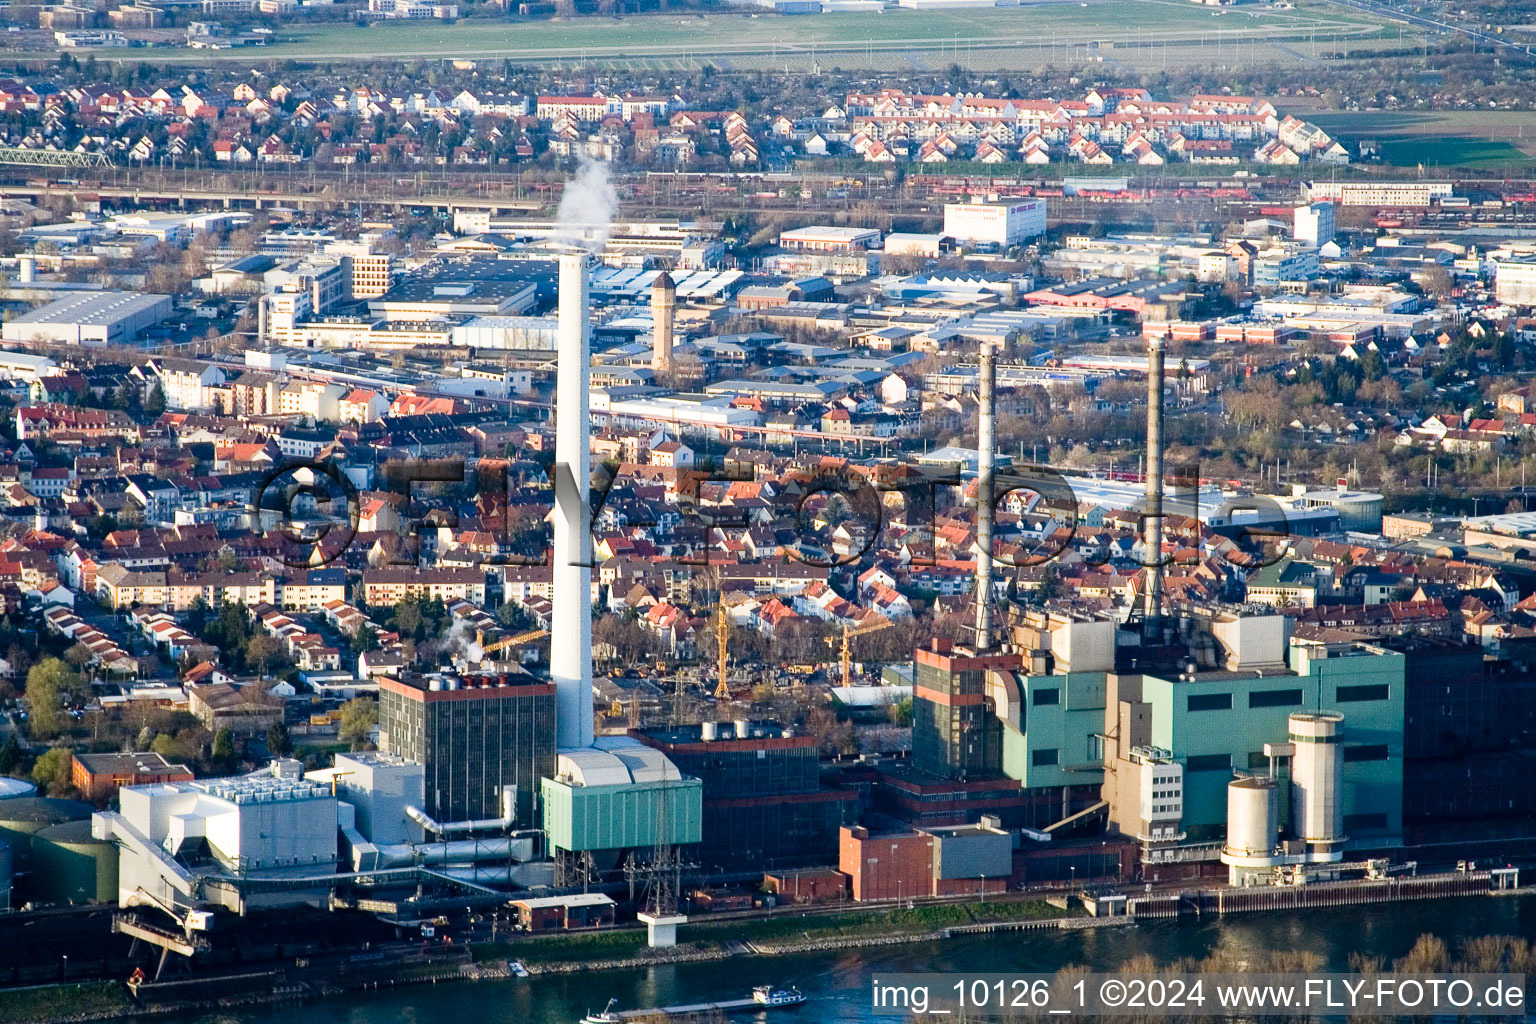 Aerial photograpy of GKM from the south in the district Neckarau in Mannheim in the state Baden-Wuerttemberg, Germany